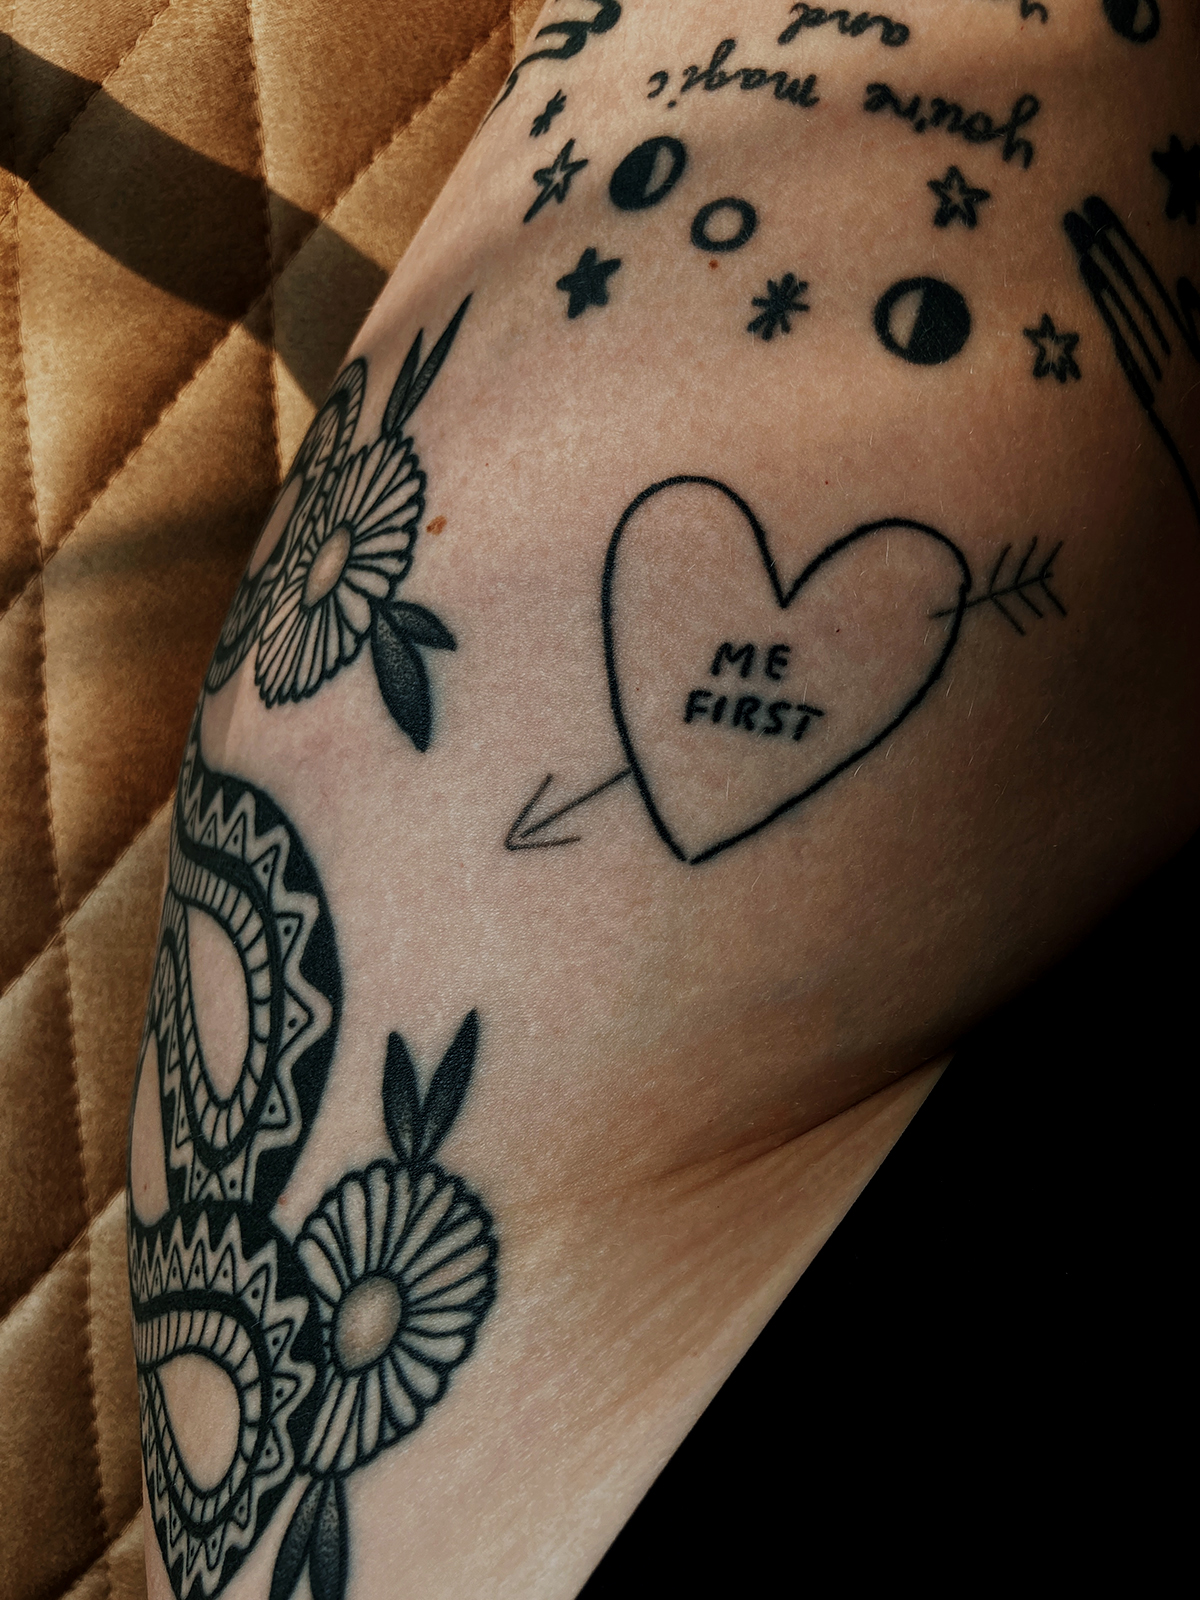 Close up of tattooed thigh, focusses on heart shaped tattoo that reads "me first".